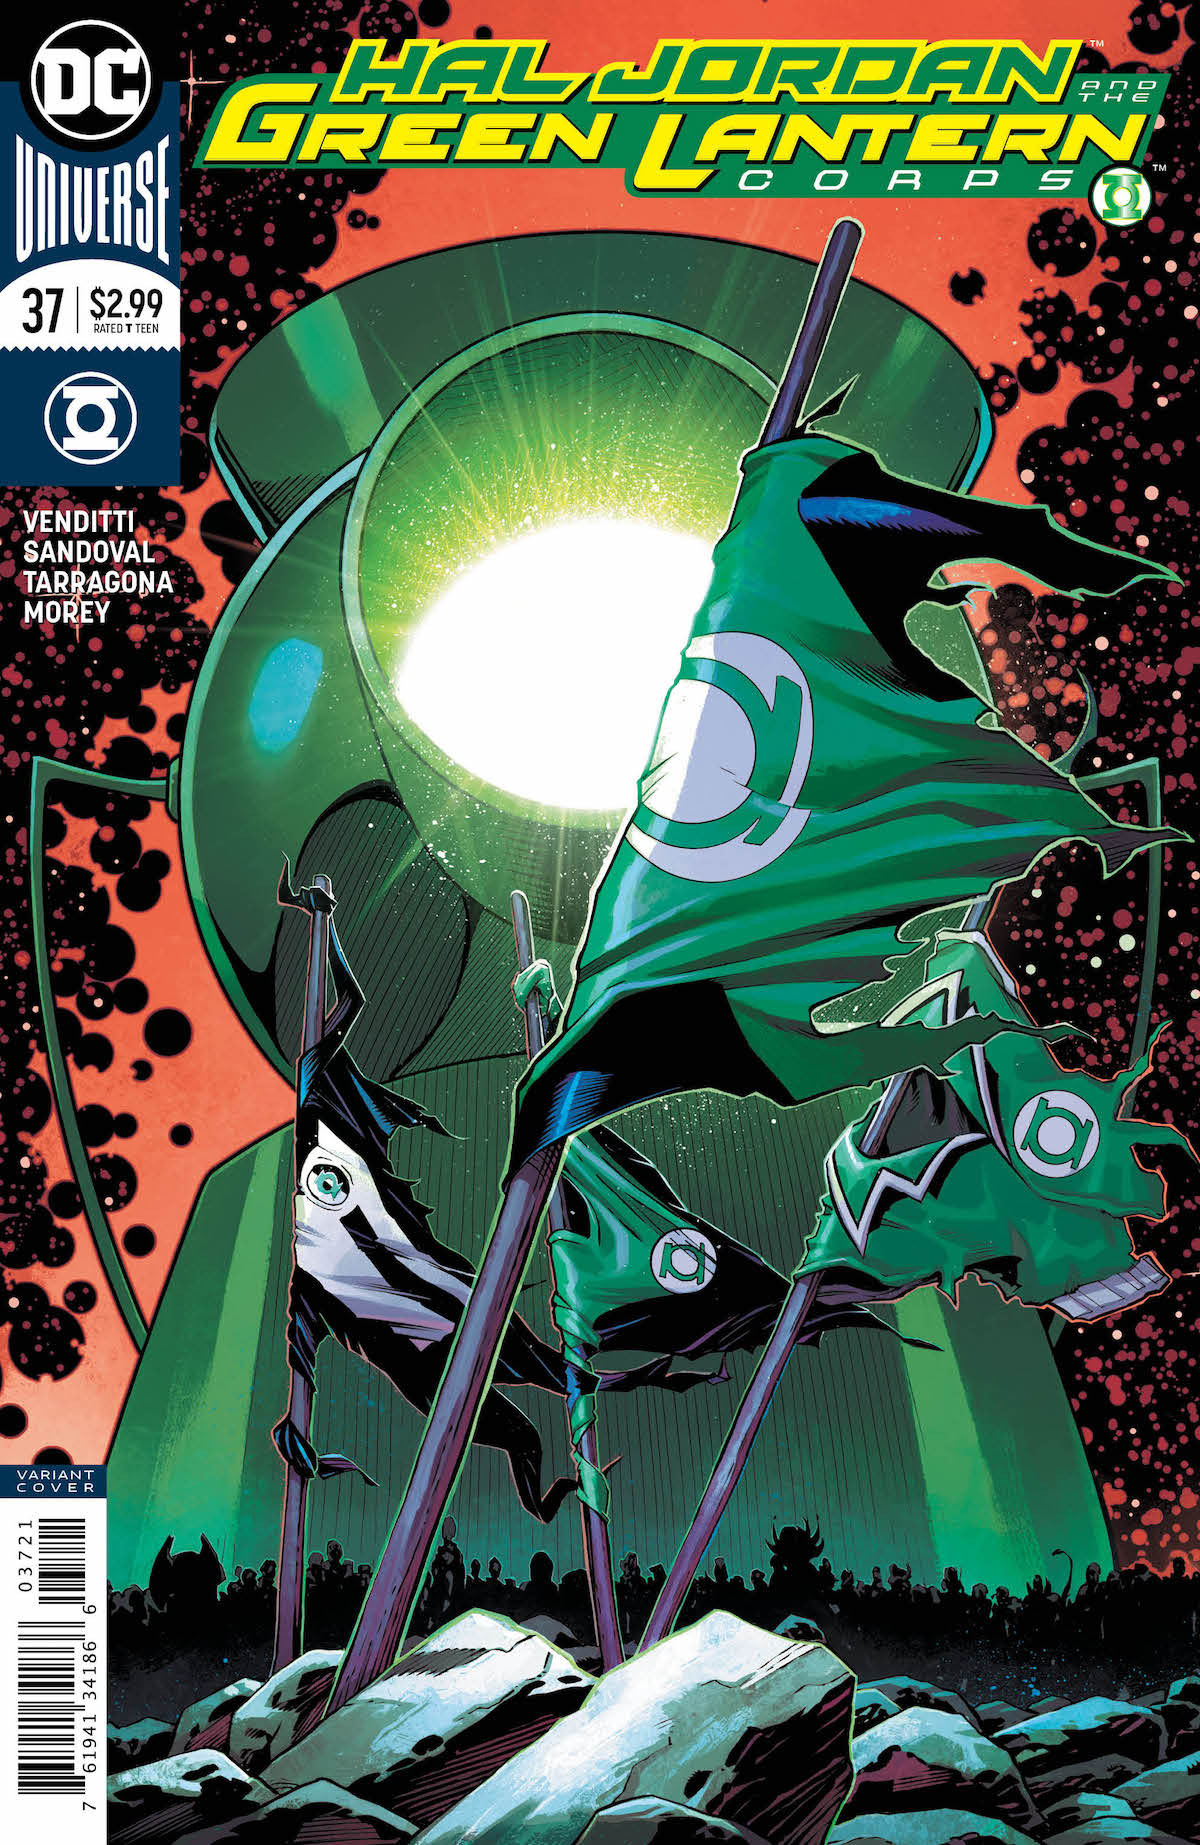 Hal Jordan and the Green Lantern Corps #37 variant cover